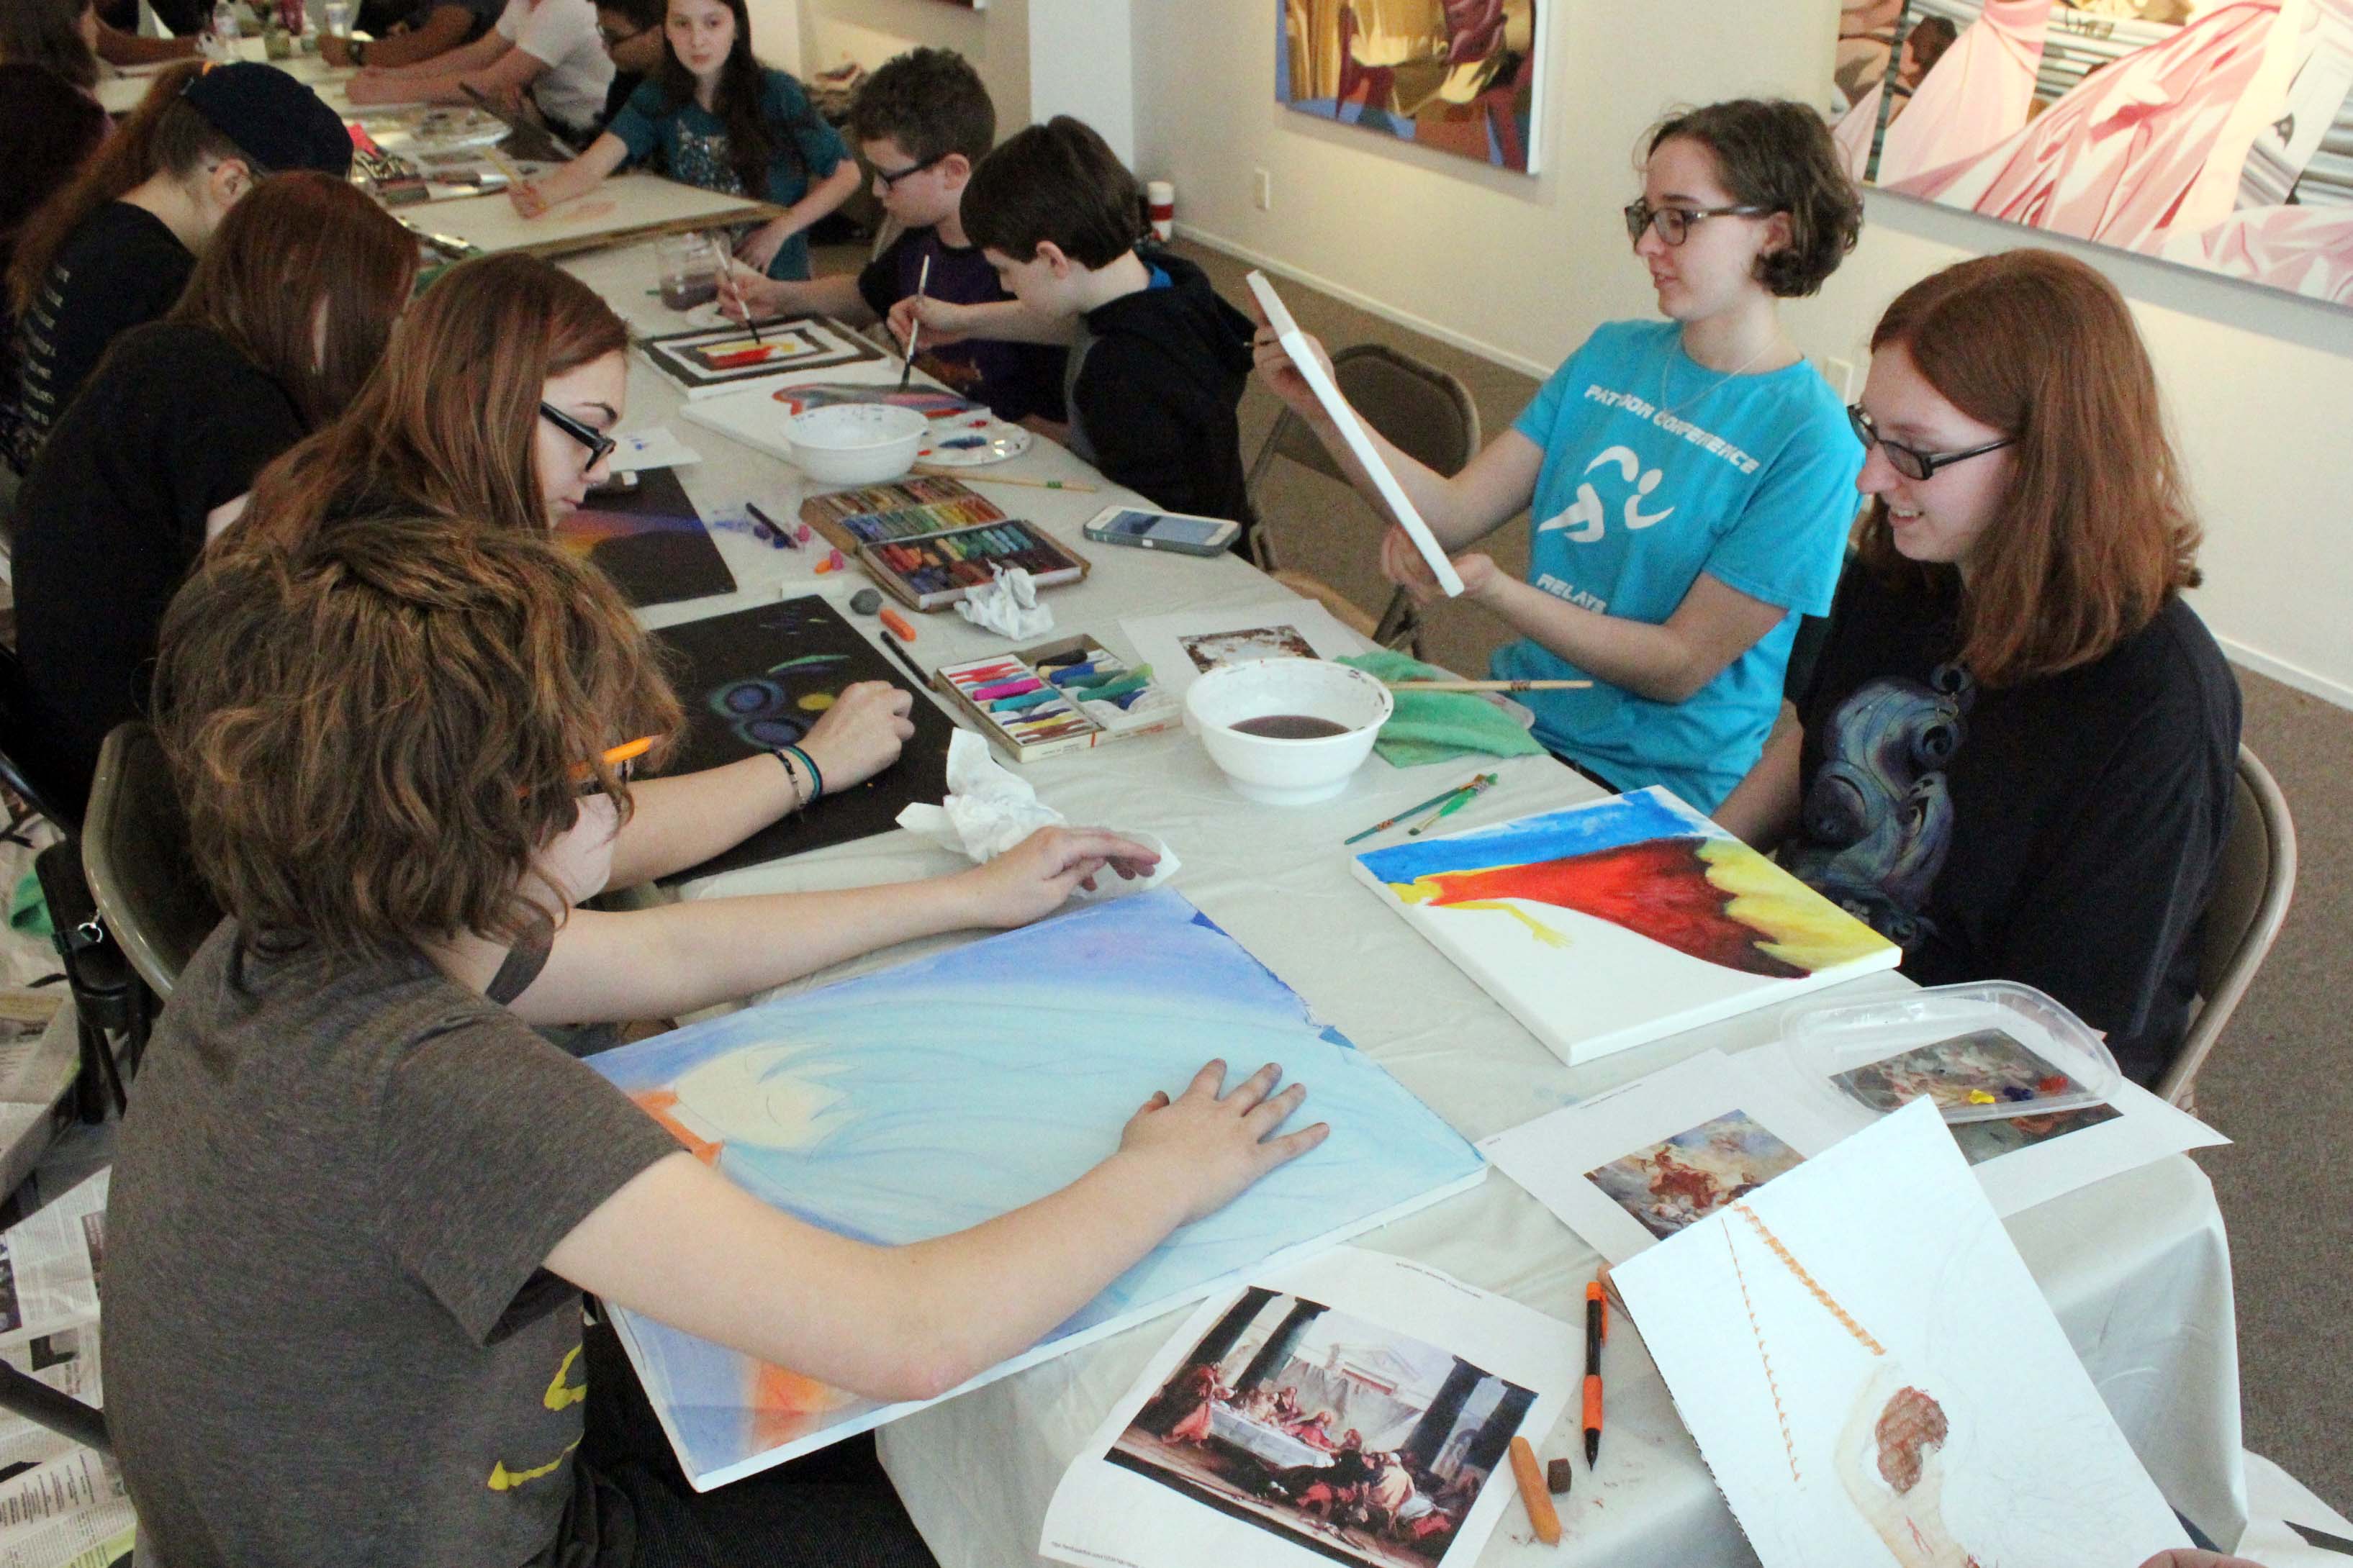 students creating artwork at table in middle of gallery